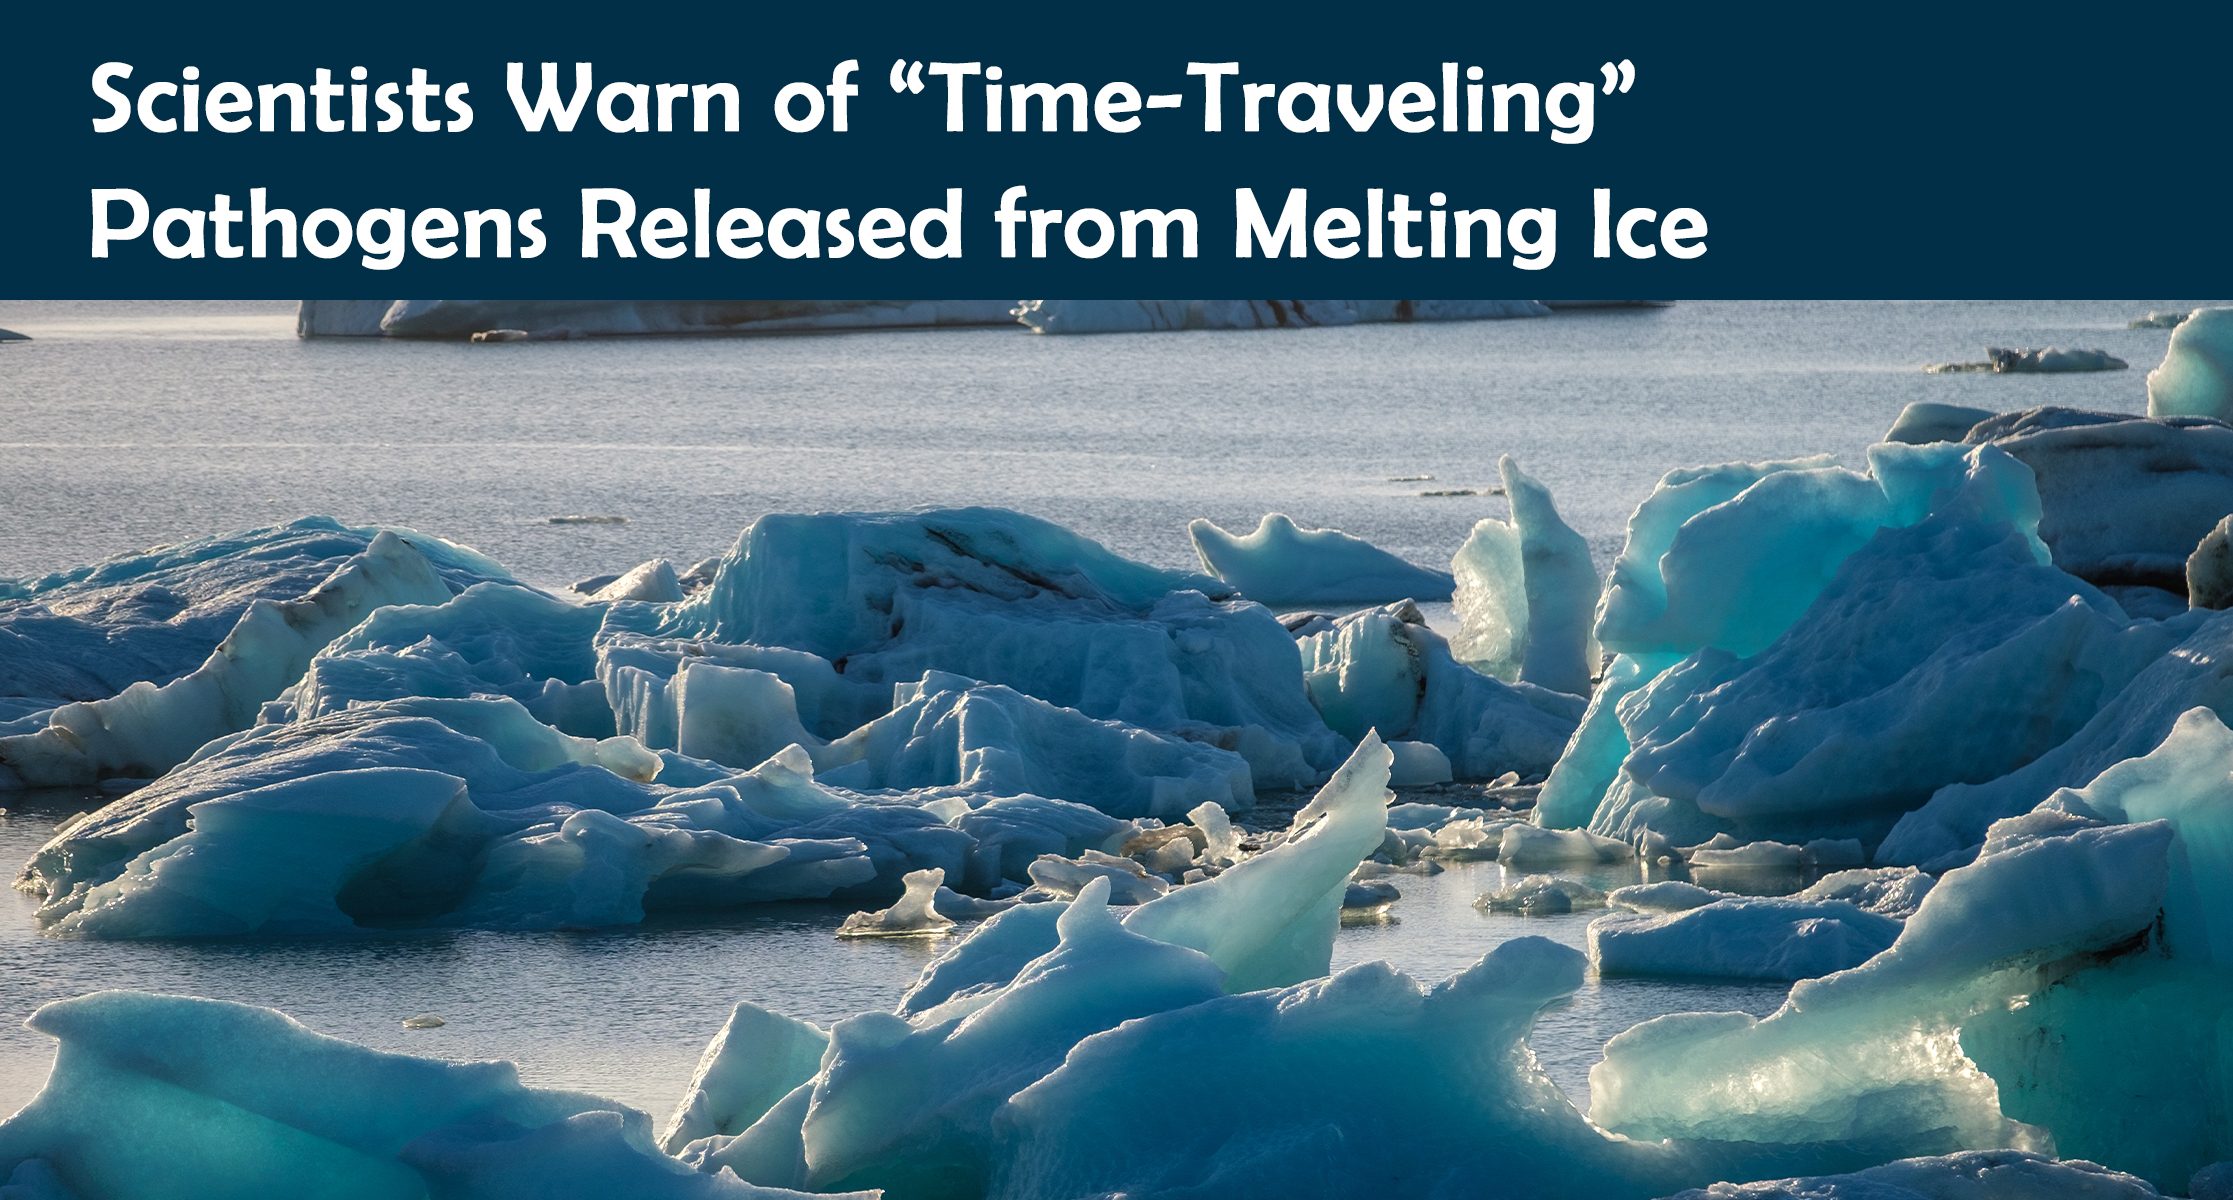 Scientists Warn of “Time-Traveling” Pathogens Released from Melting Ice